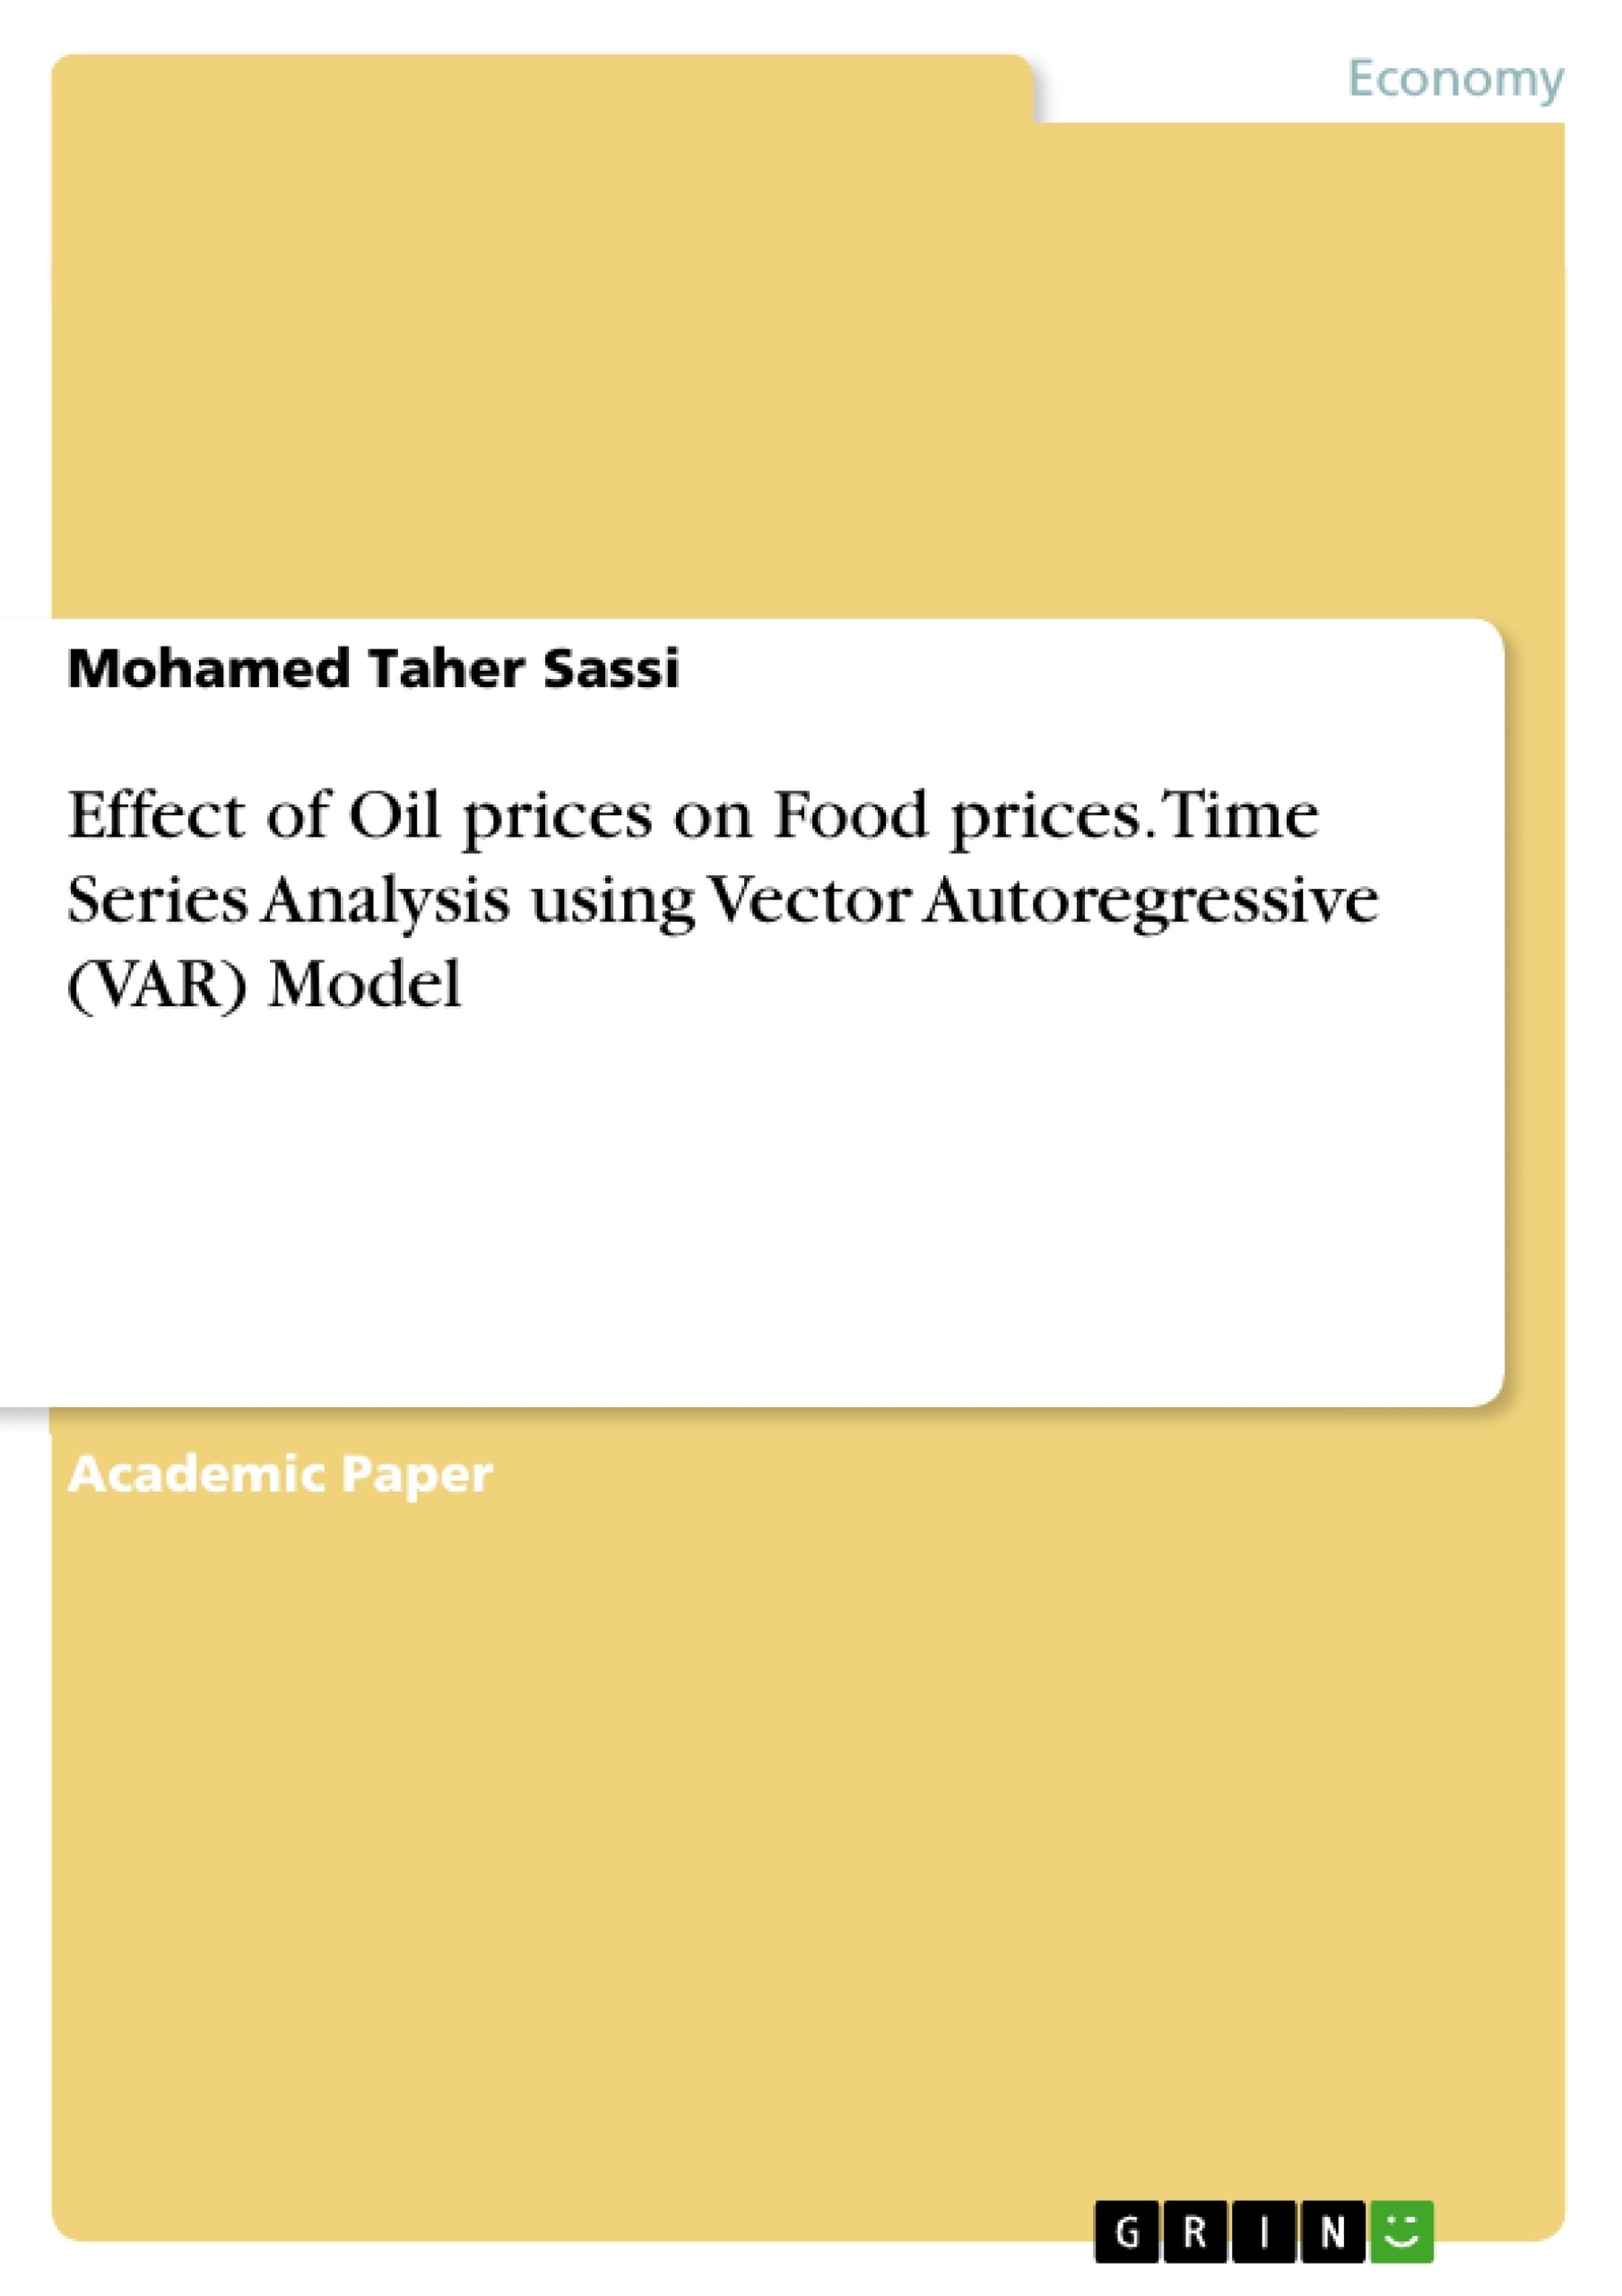 Titel: Effect of Oil prices on Food prices. Time Series Analysis using Vector Autoregressive (VAR) Model